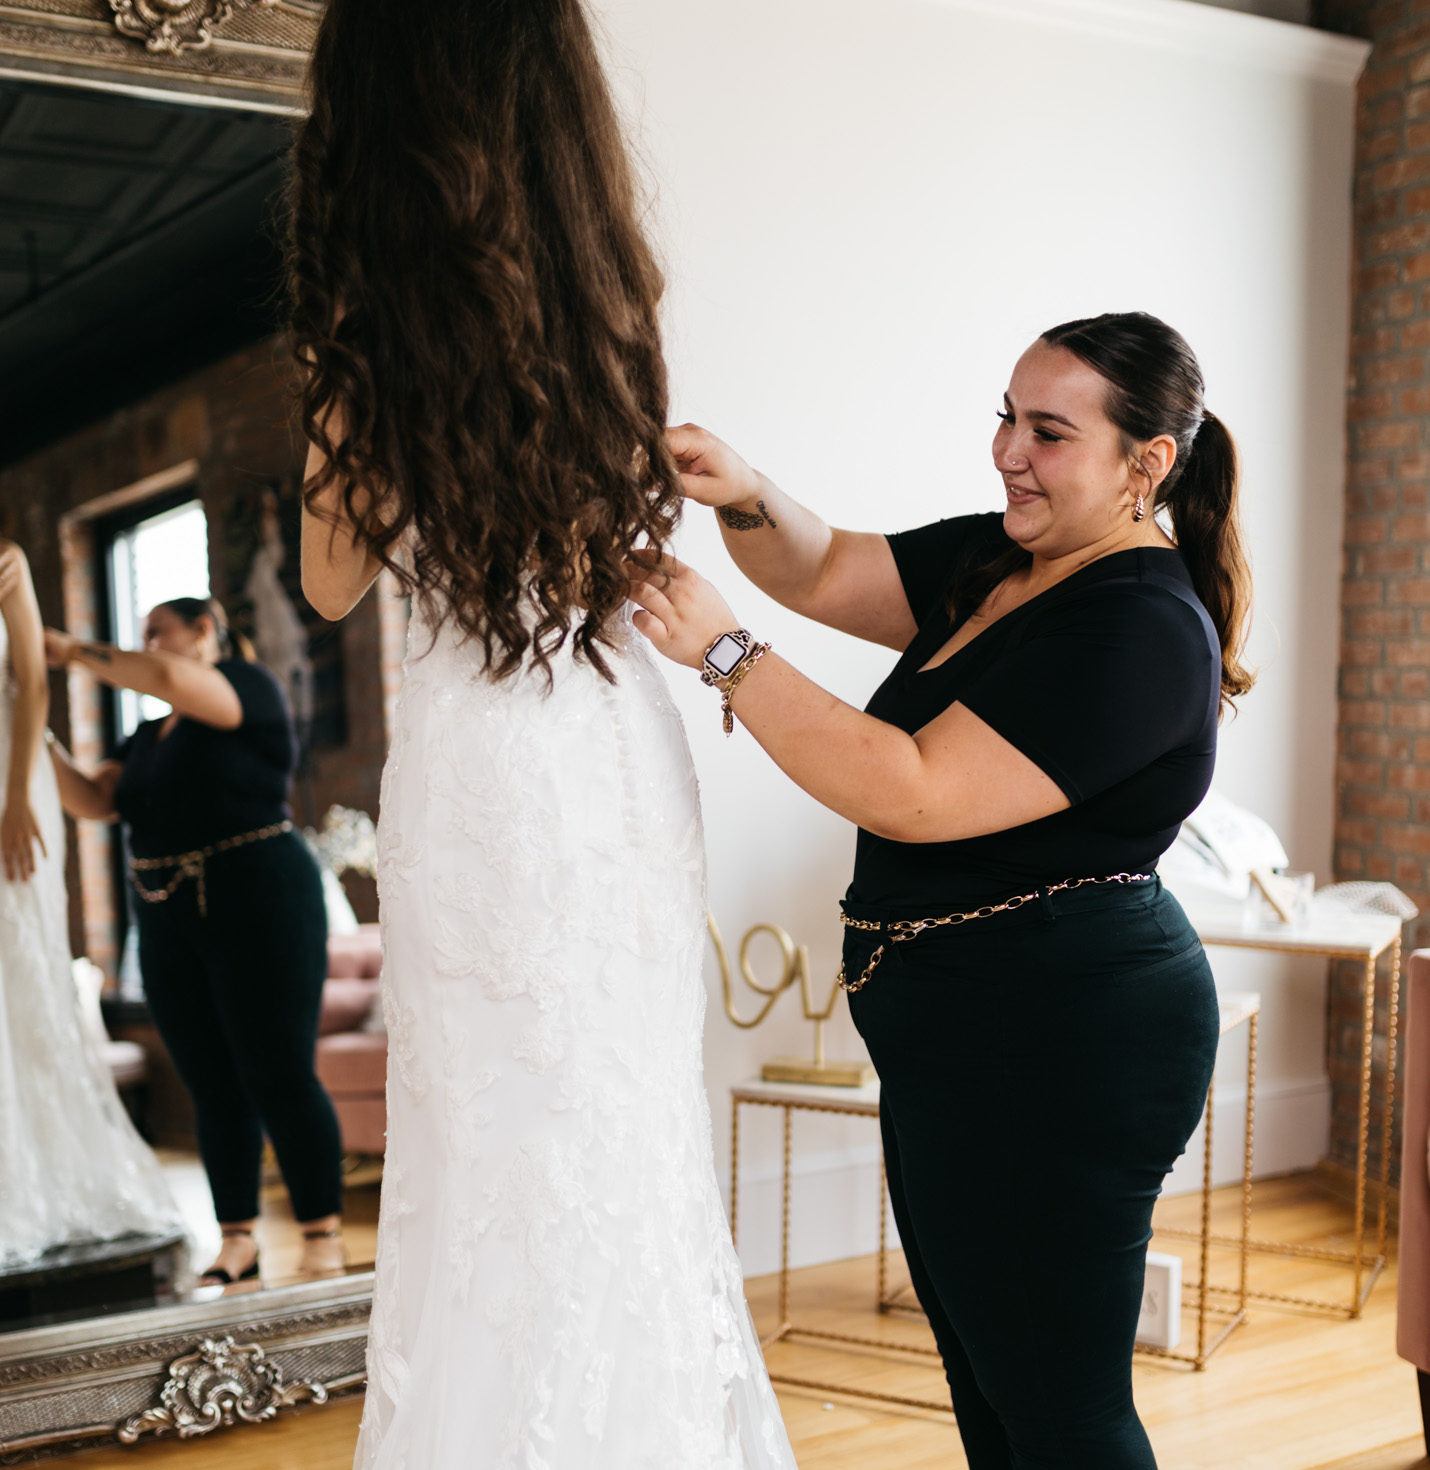 A bride getting her dress altered.